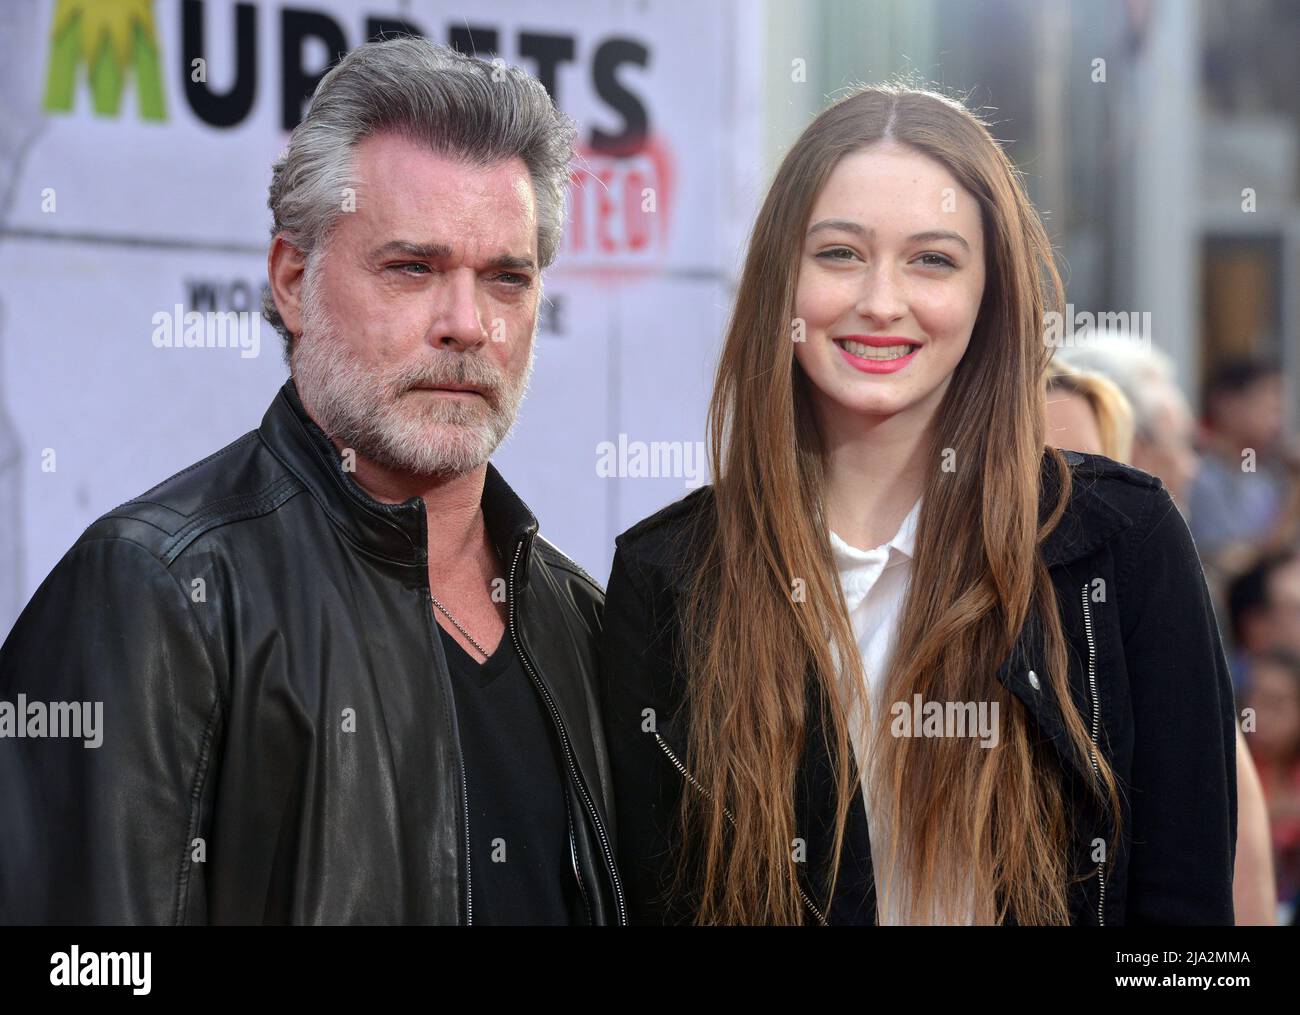 Los Angeles, USA. 11th Mar, 2014. Ray Liotta and daughter Karsen Liotta arriving at the Muppets Most Wanted Premiere at the El Capitan Theatre in Los Angeles.Ray Liotta and daughter Karsen Liotta 070 Ray Liotta, the actor best known for playing mobster has died. He was 67. Credit: Tsuni/USA/Alamy Live News Stock Photo